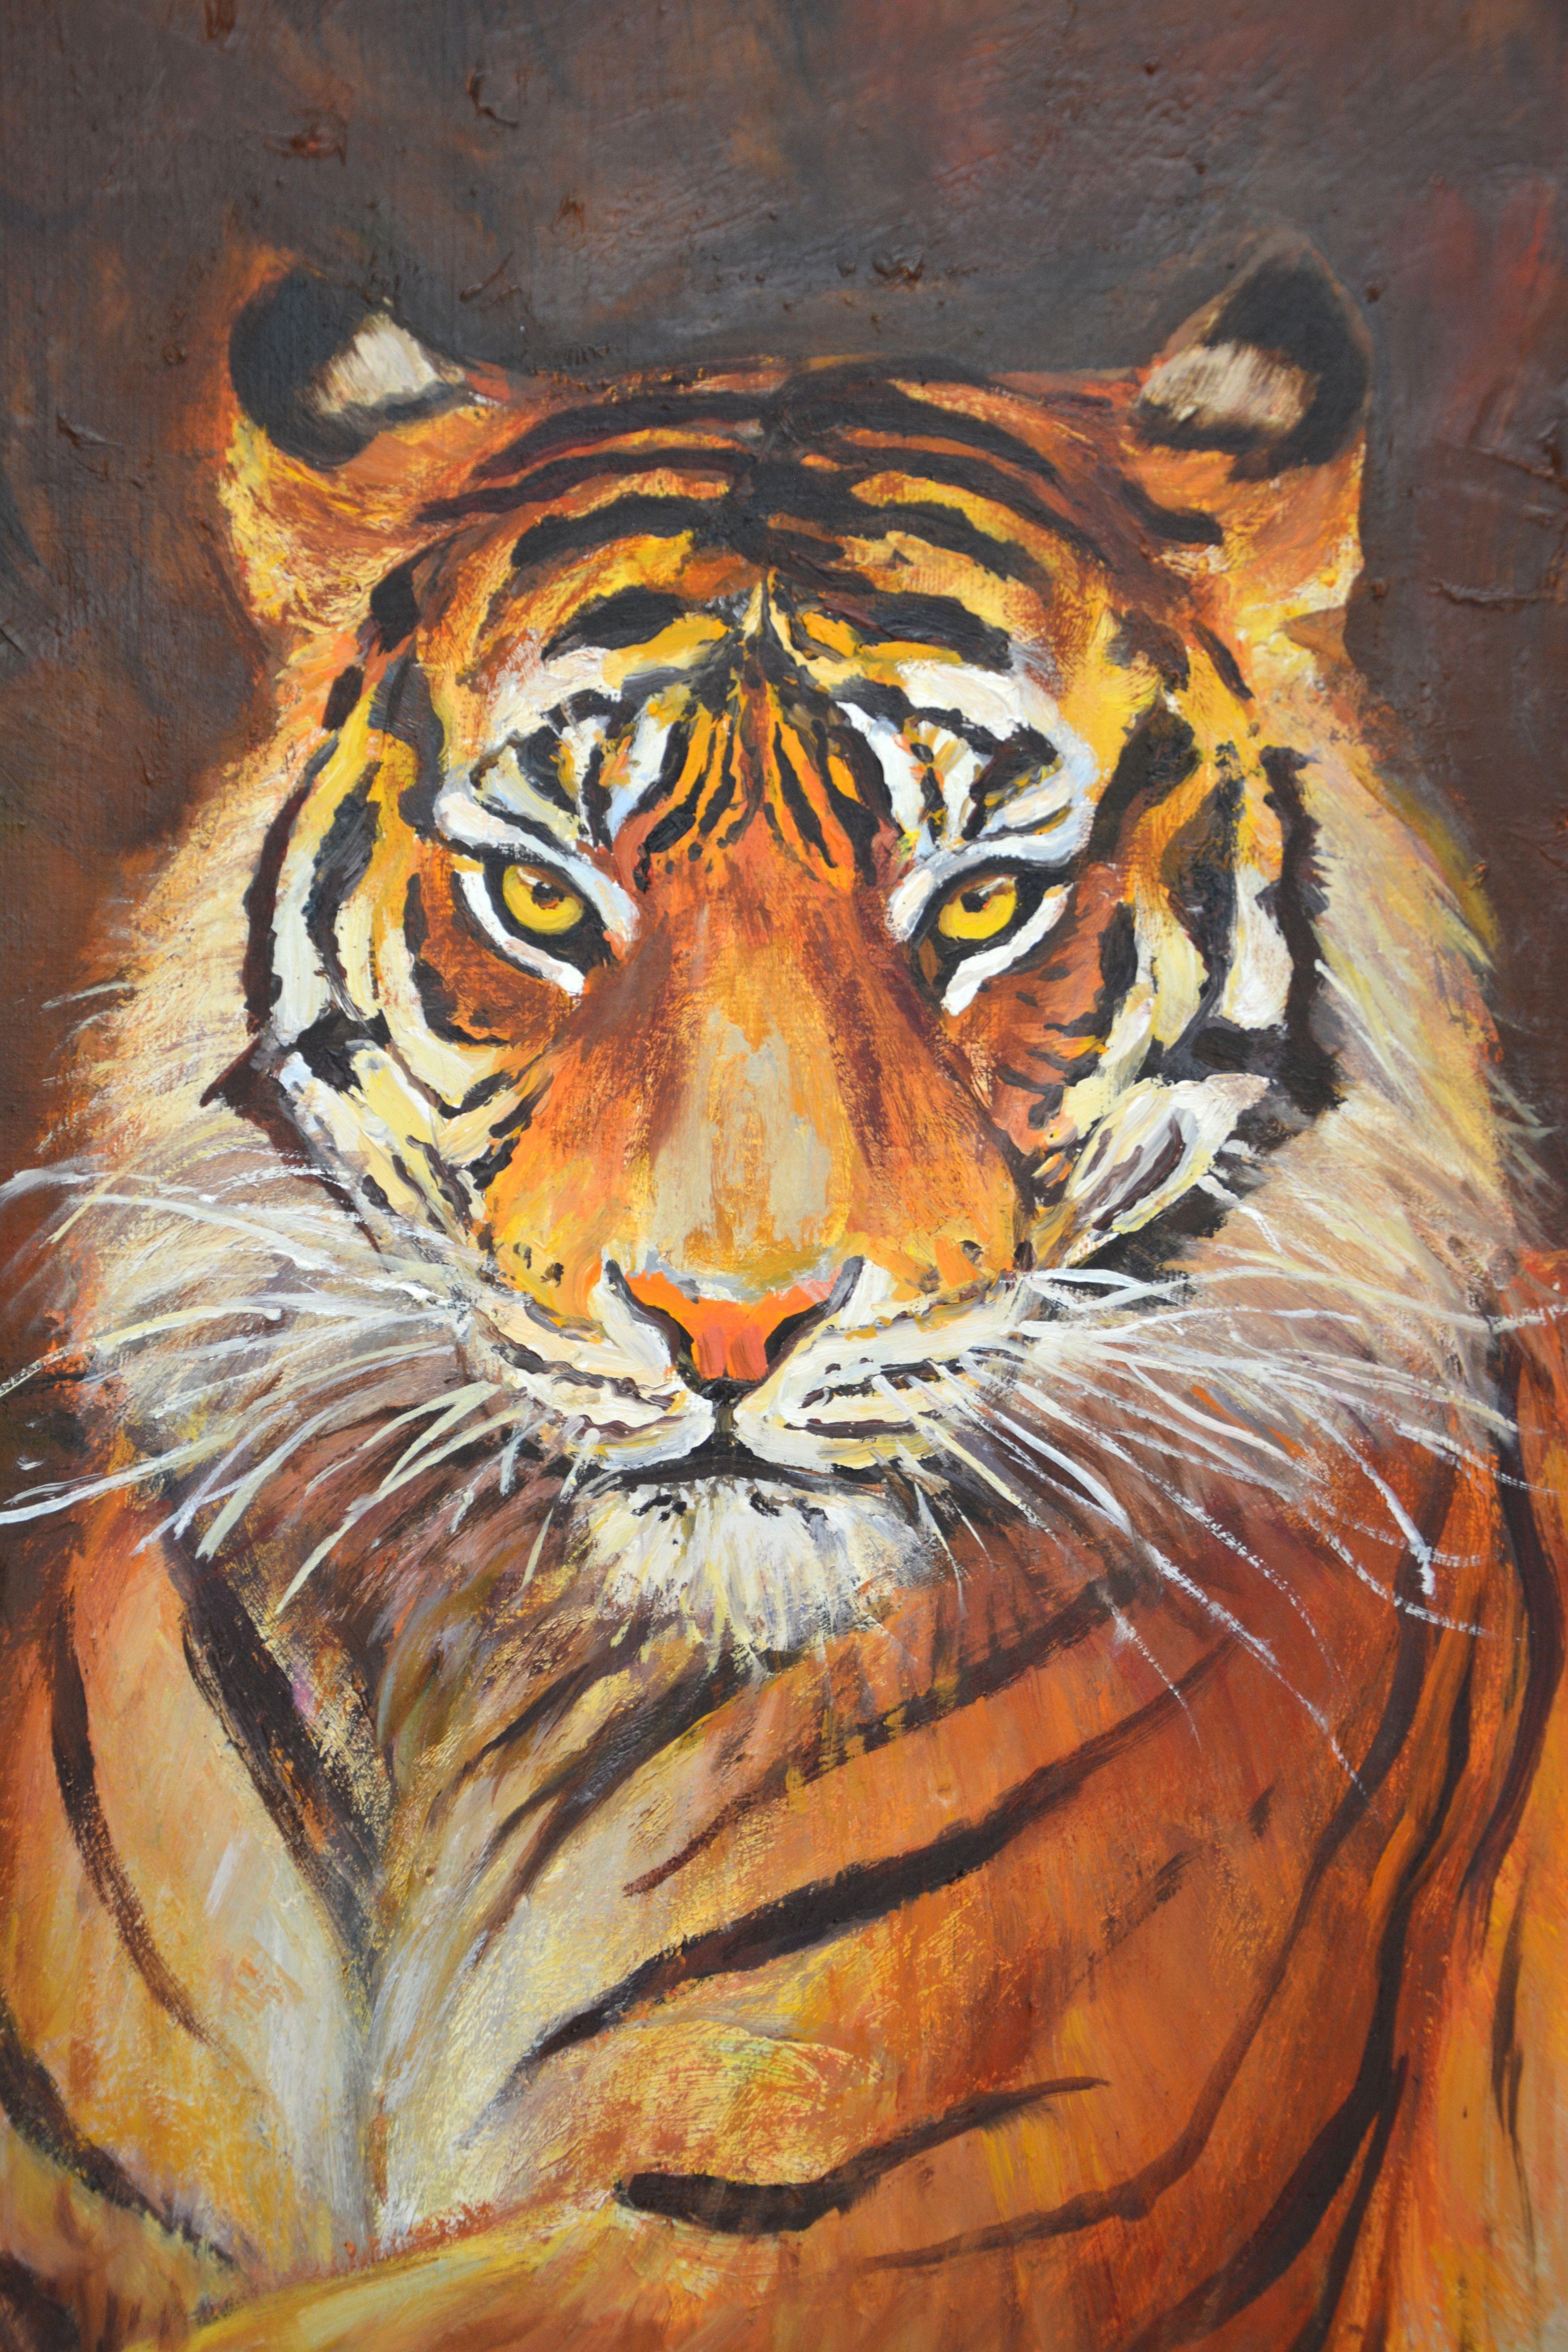 Tiger, predator, hunter, painted in the style of impressionism. Animal on a dark background. Original work, one of a kind. Oil painting on linen canvas, signed by the artist, the sides are painted in the color of the painting, varnished, ready to